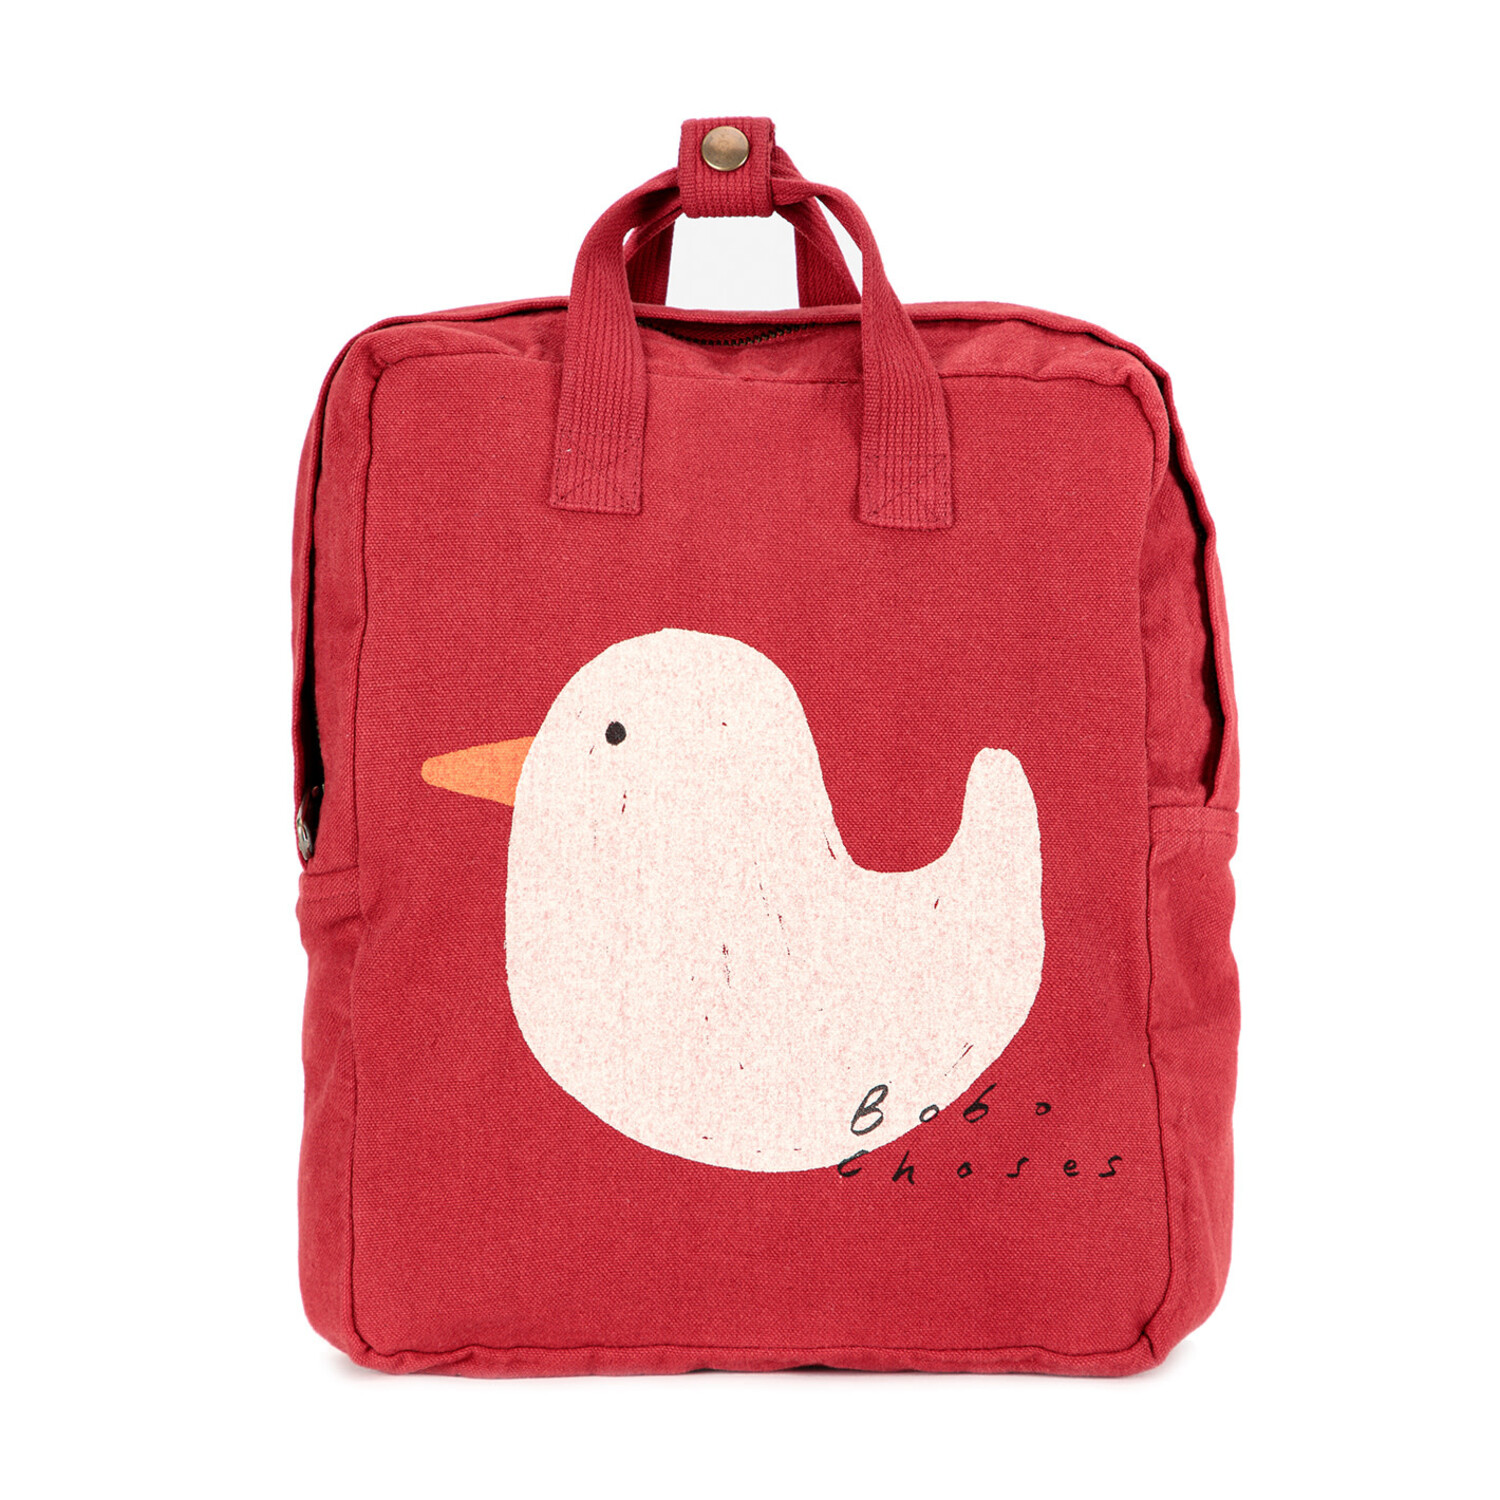 Rubber Duck School Backpack - Lucky Wang nyc